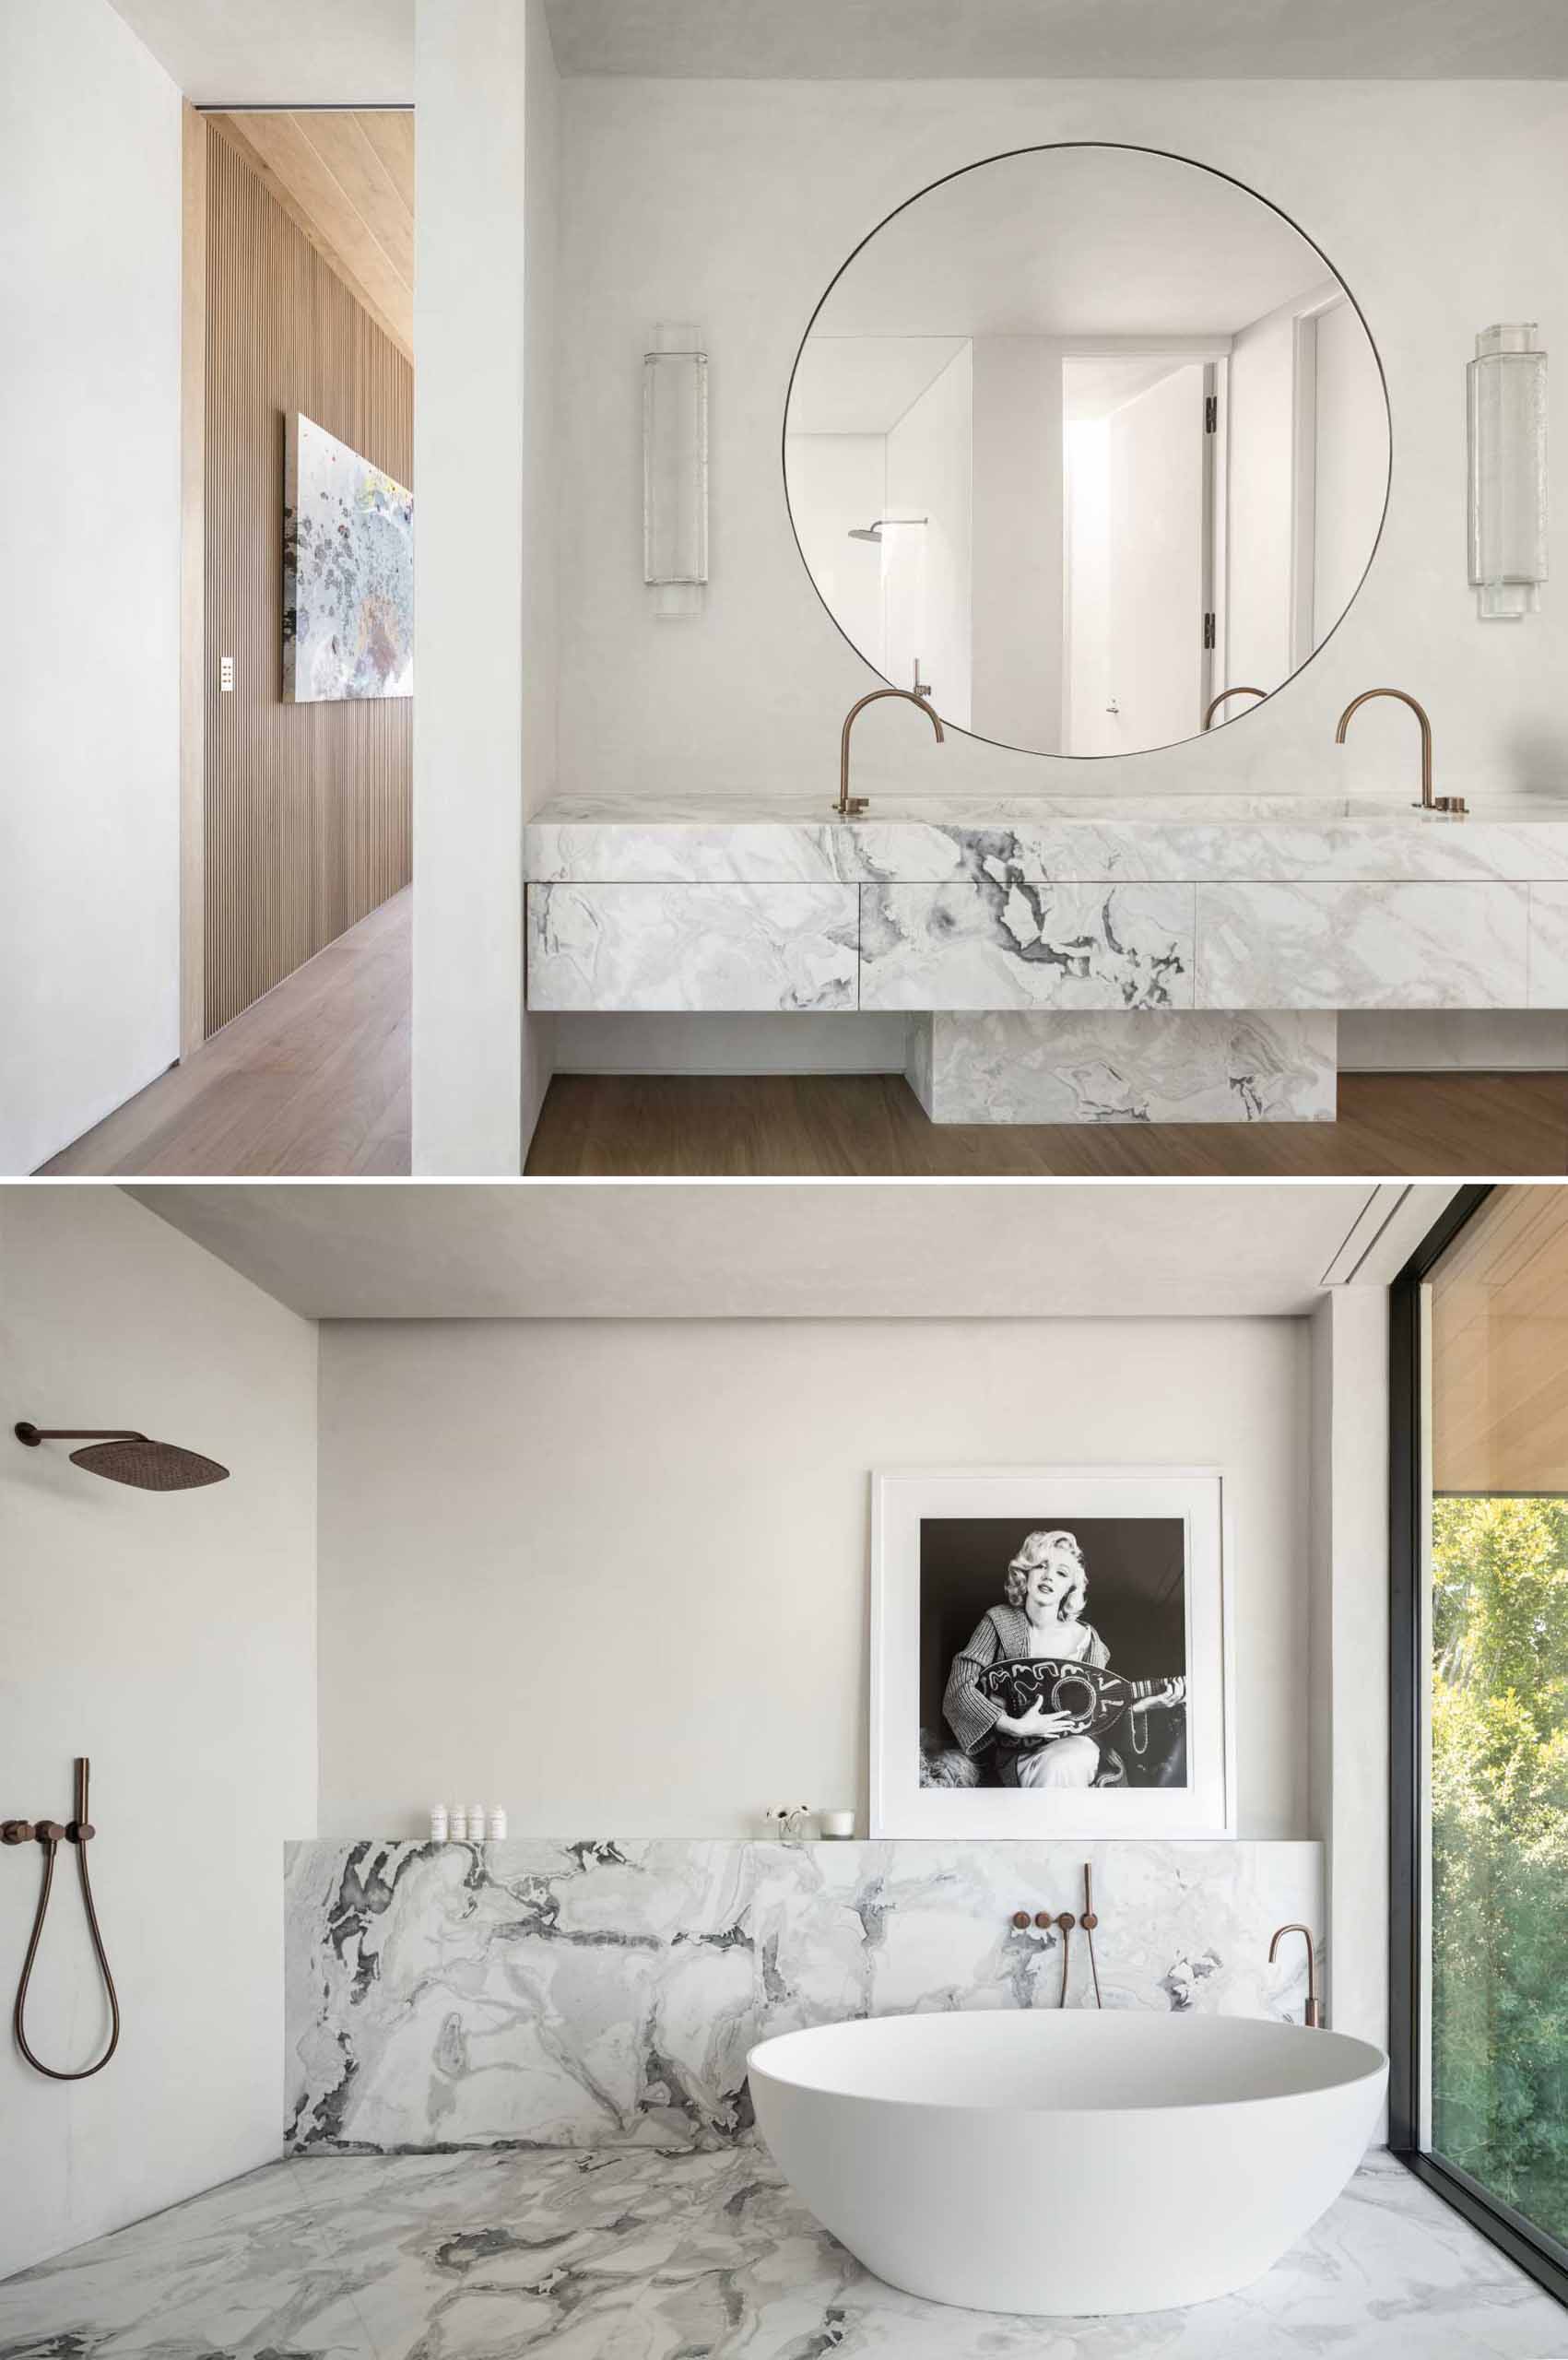 A modern bathroom with a stone vanity, a large round mirror, and a freestanding bathtub.